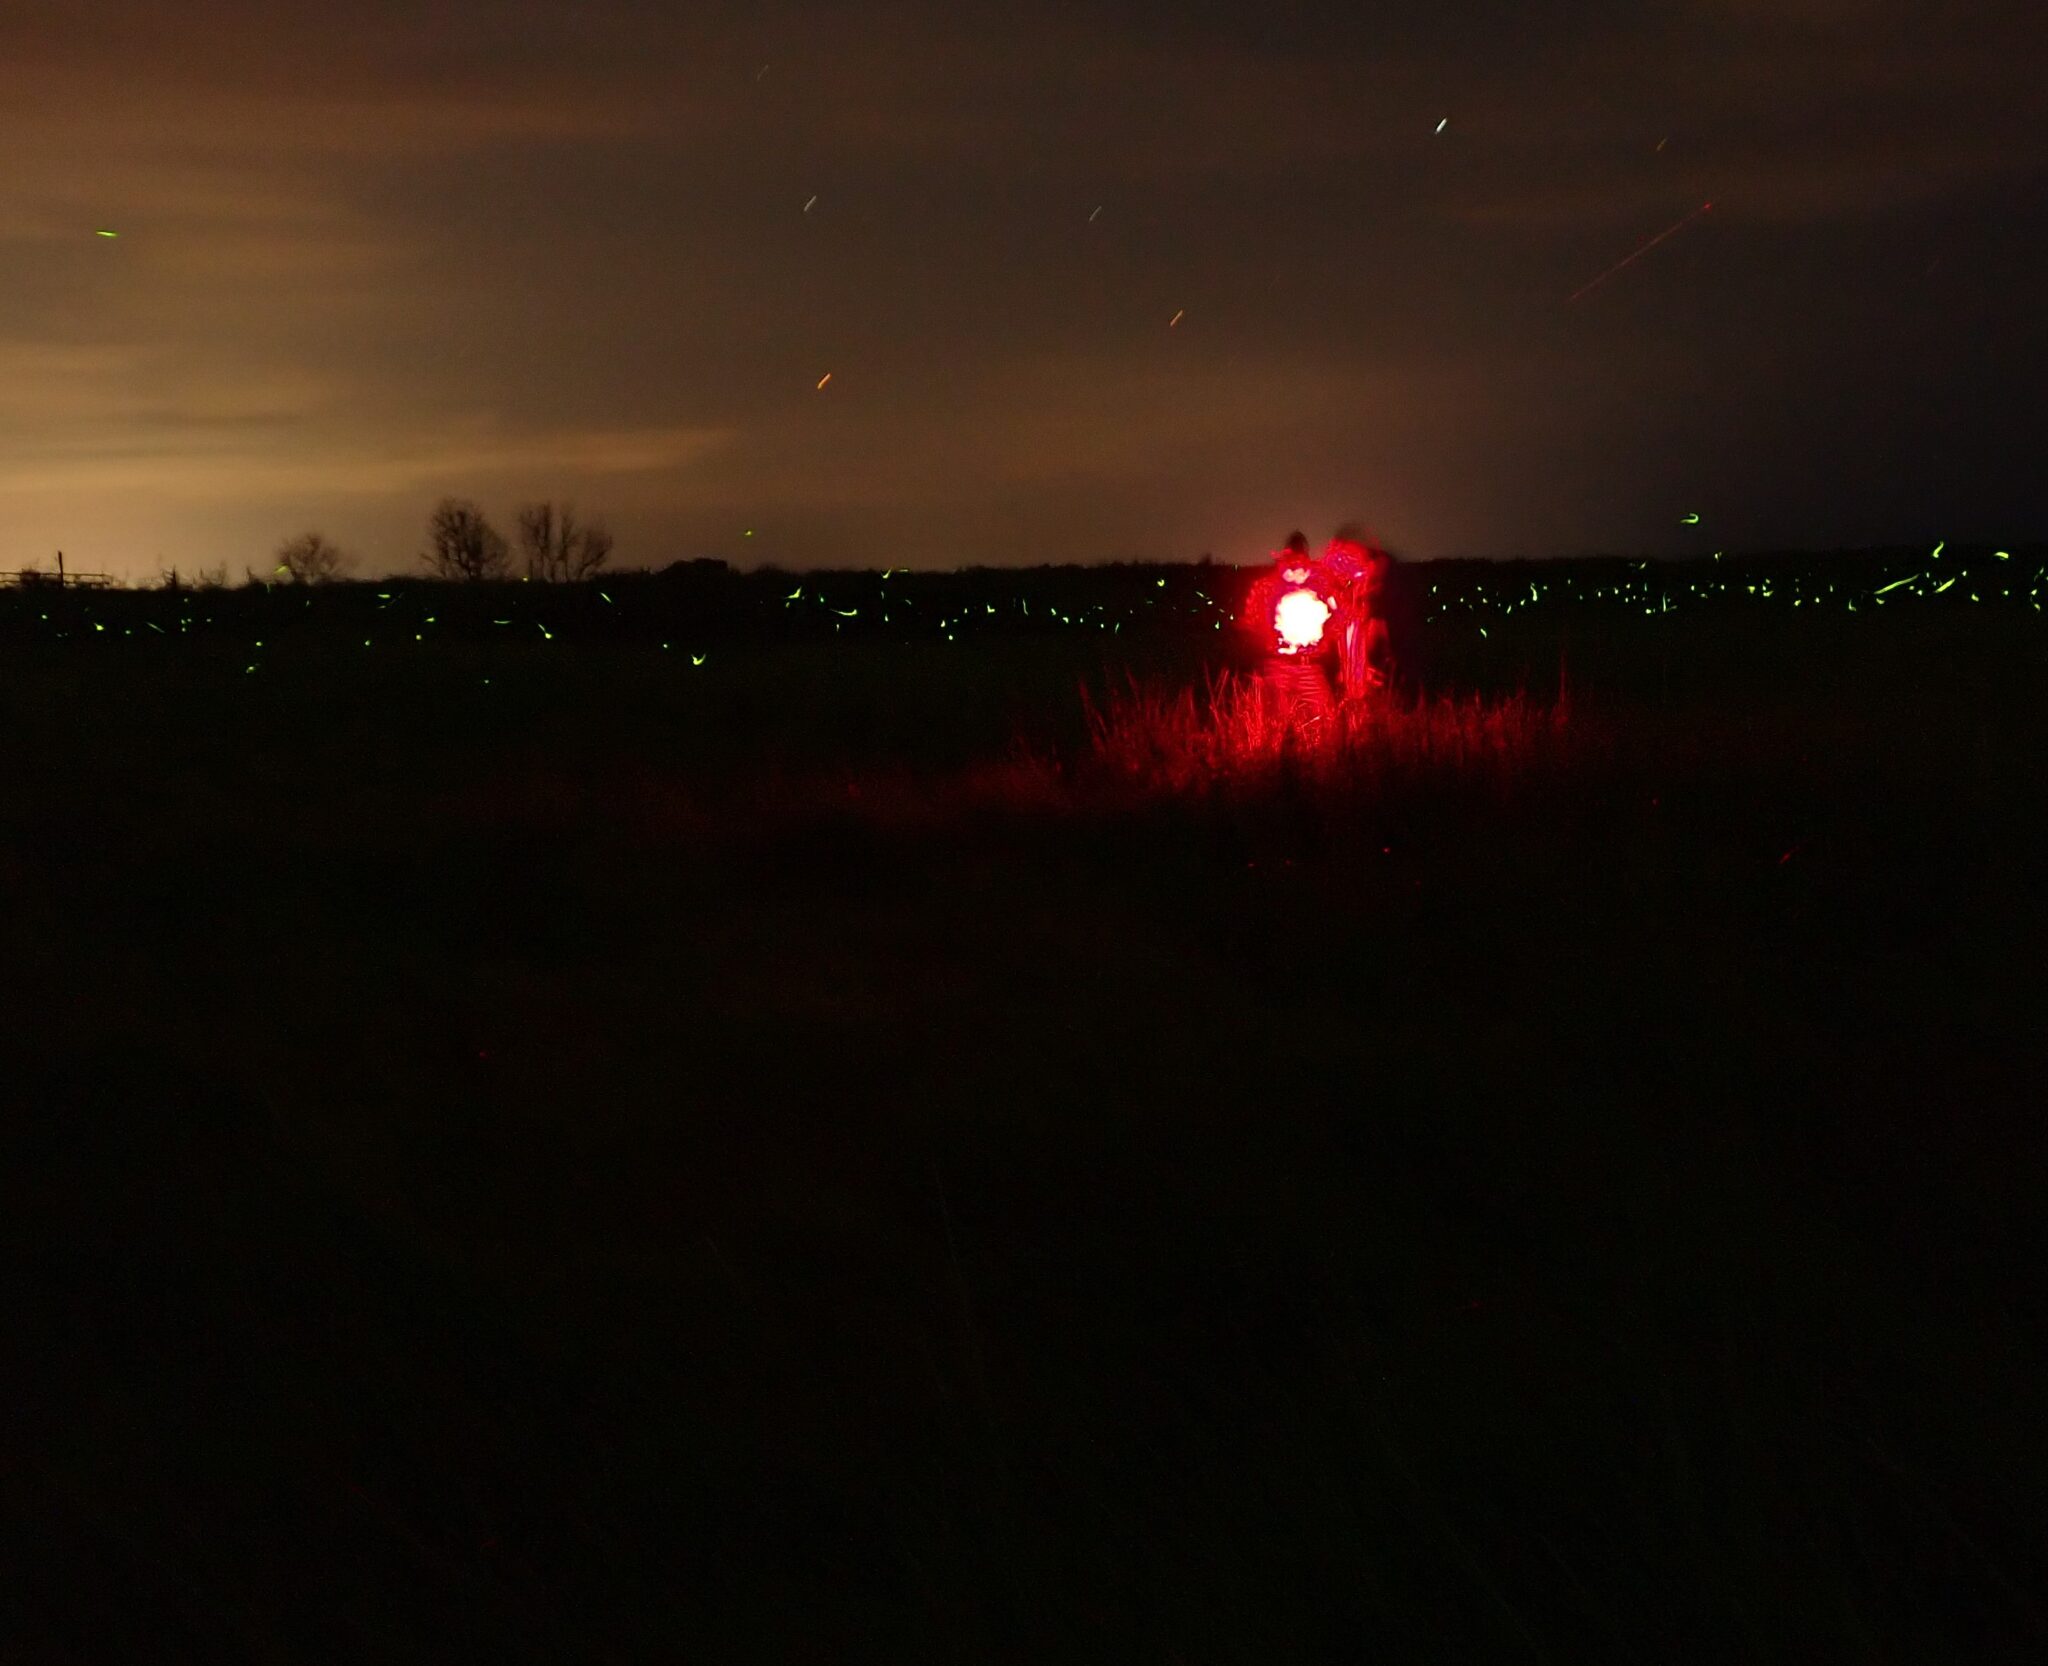 Firefly surveyors stand in a field at night, using a red headlamp and with green firefly flashes in the background.